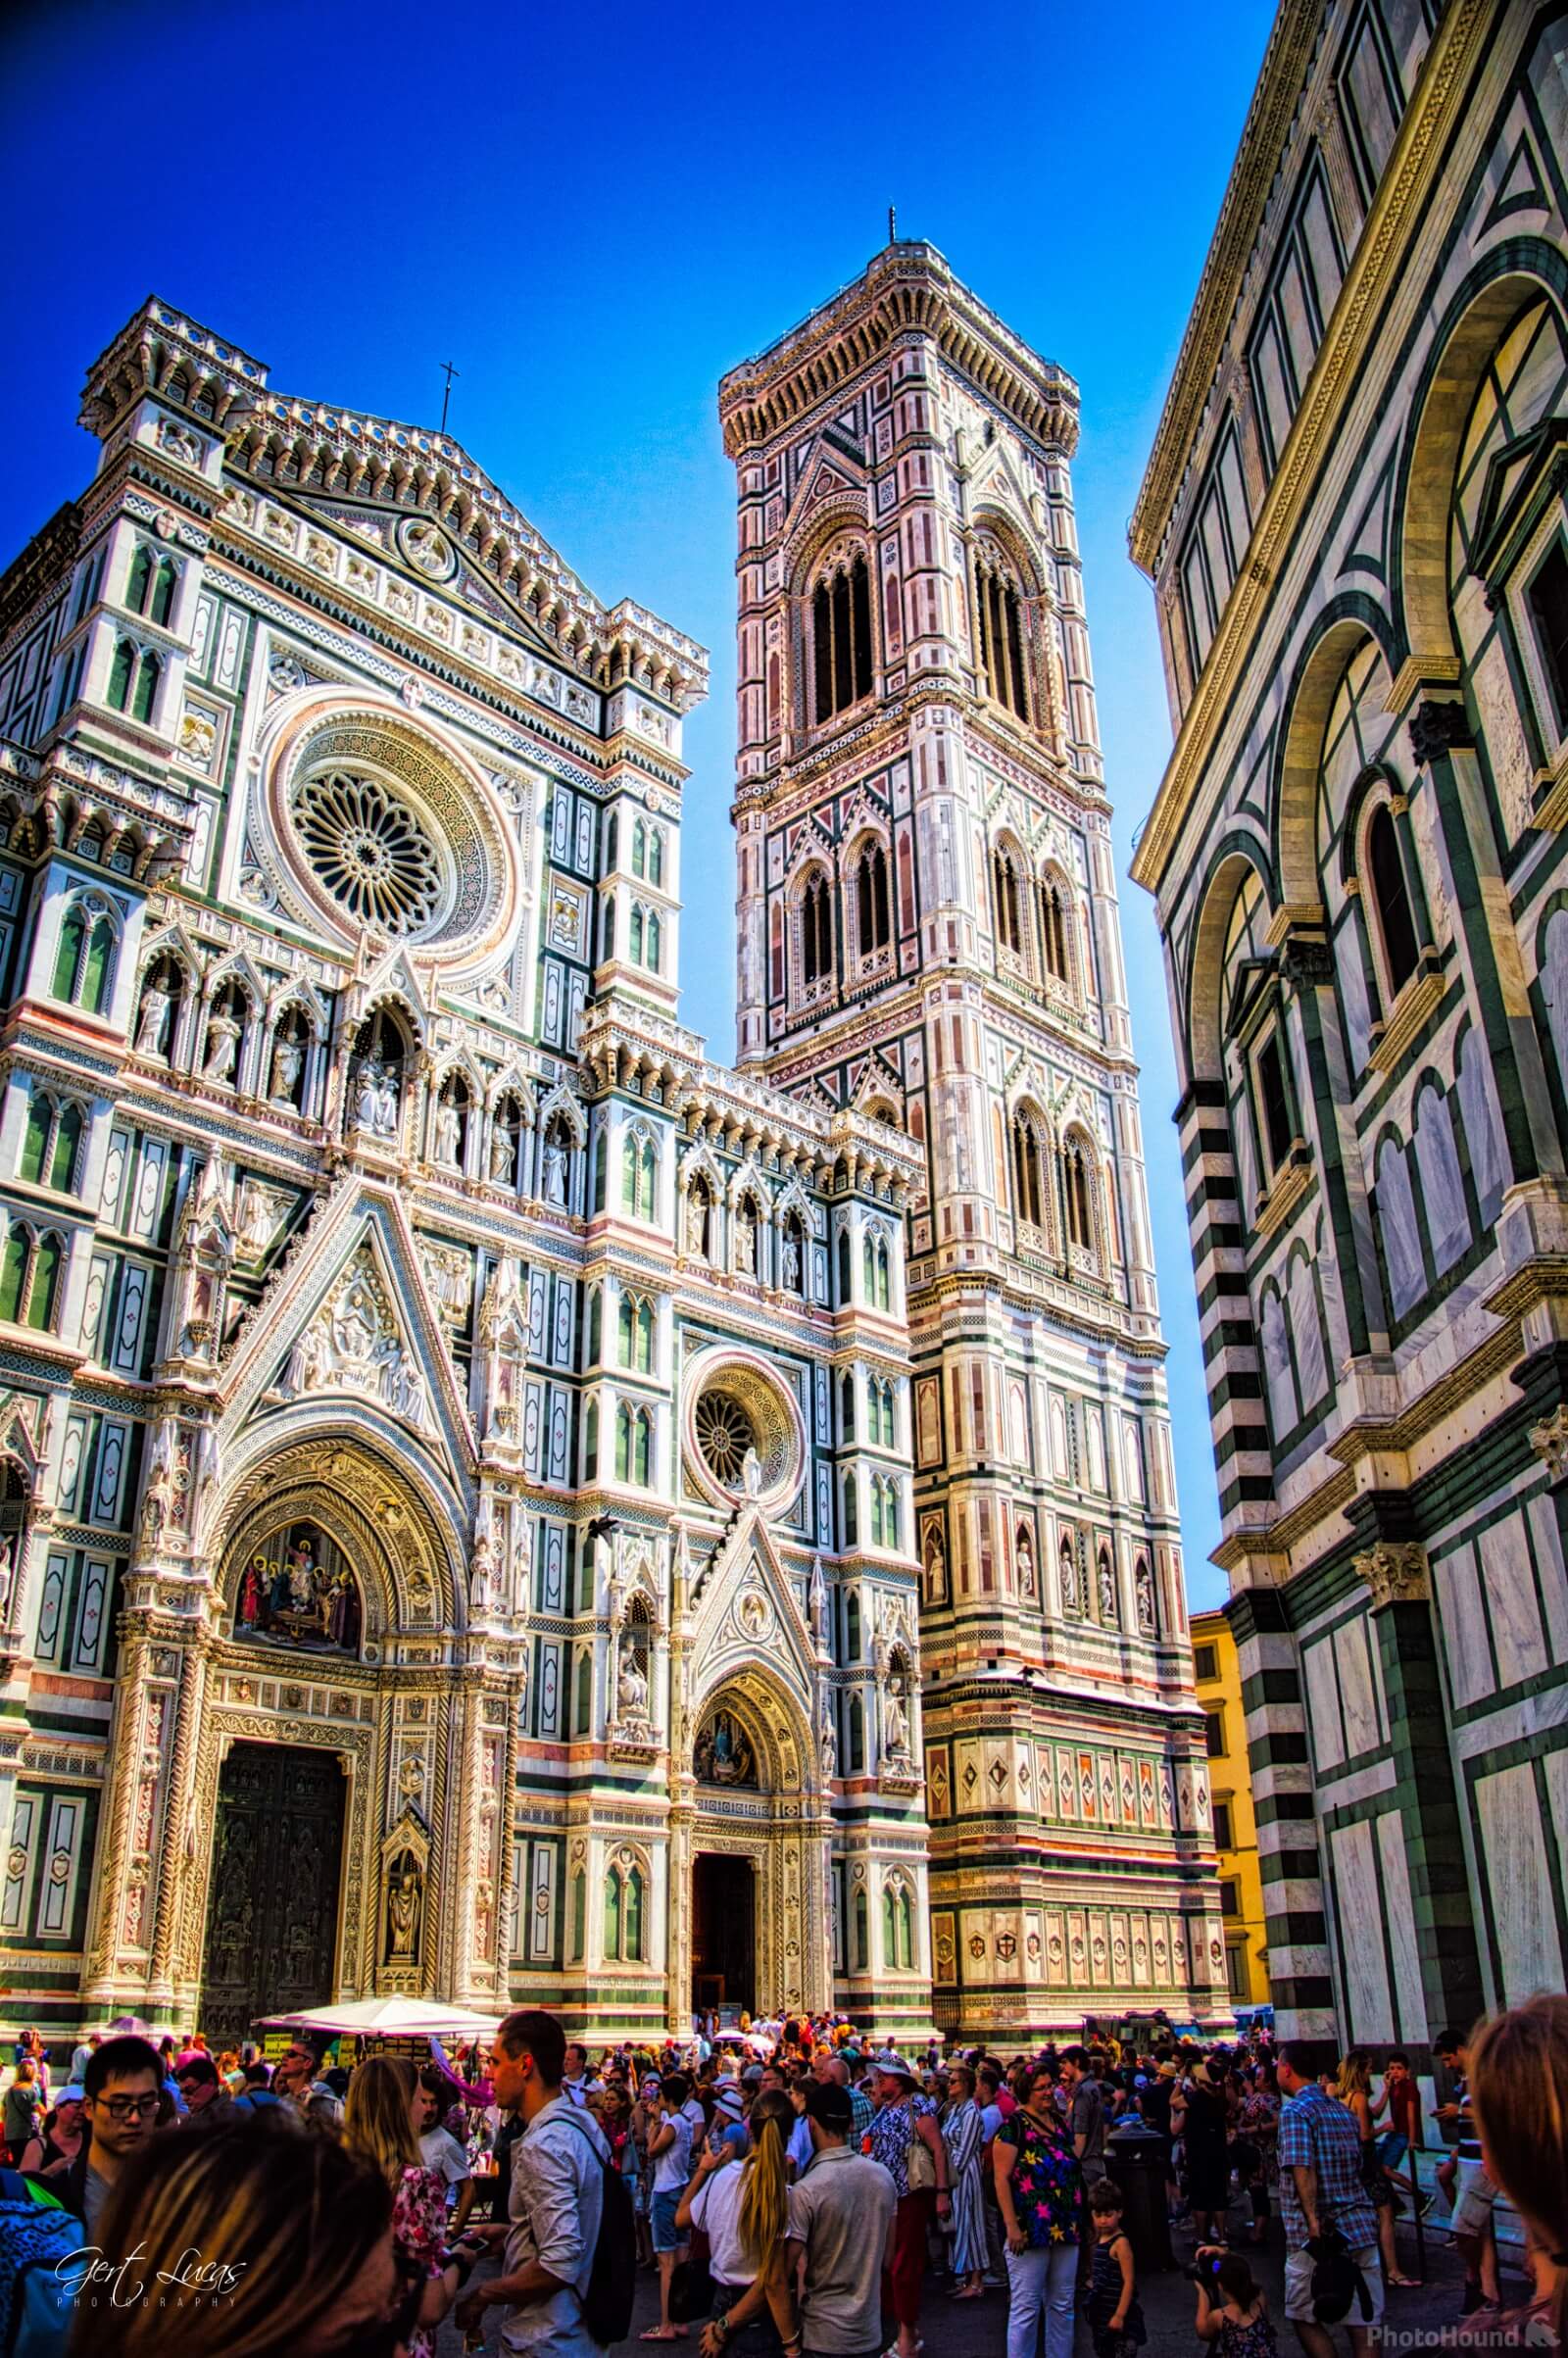 Image of Piazza del Duomo, Firenze by Gert Lucas